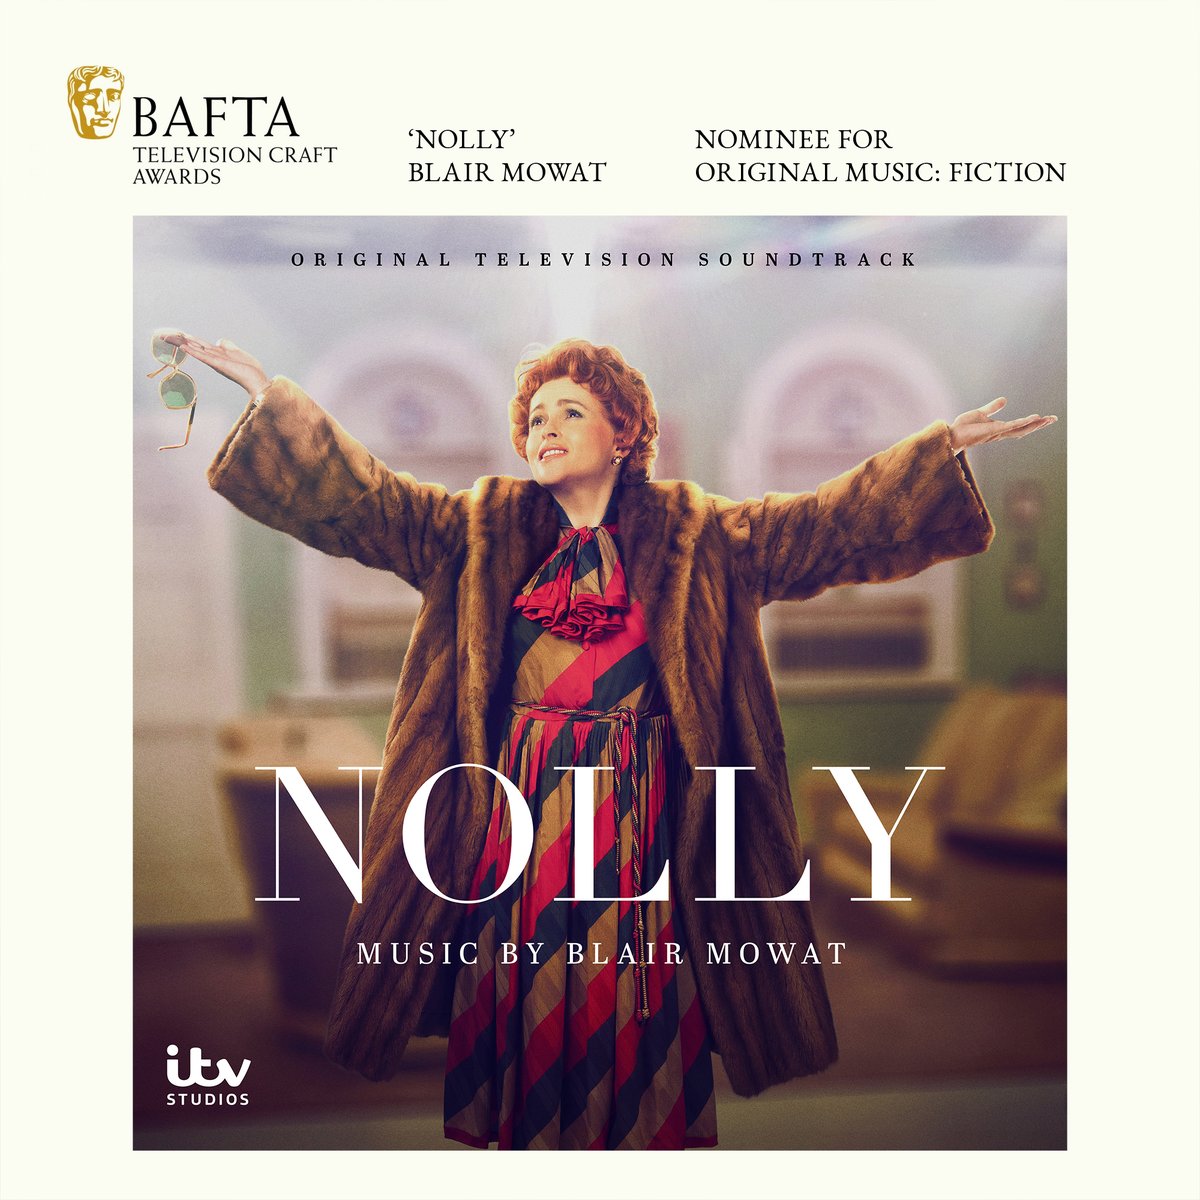 Congratulations to 'NOLLY' composer @BlairMowat for the 2024 @BAFTA Television Craft Awards nomination! Listen to the soundtrack nominated in the 'Original Music: Fiction' category here: blairmowat.lnk.to/Nolly